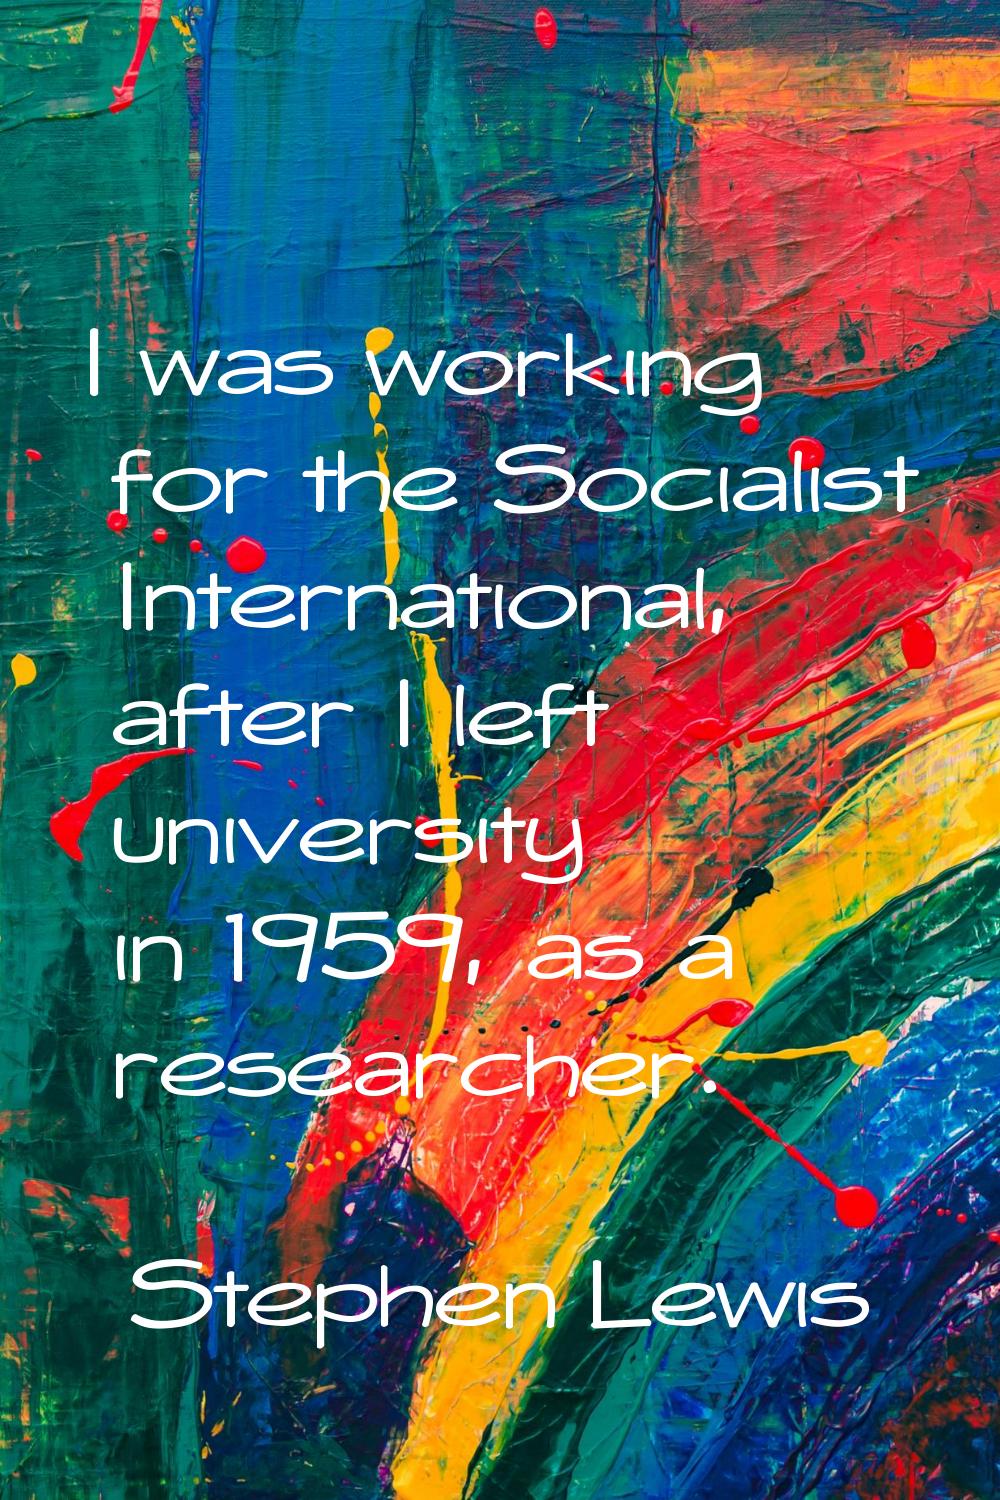 I was working for the Socialist International, after I left university in 1959, as a researcher.